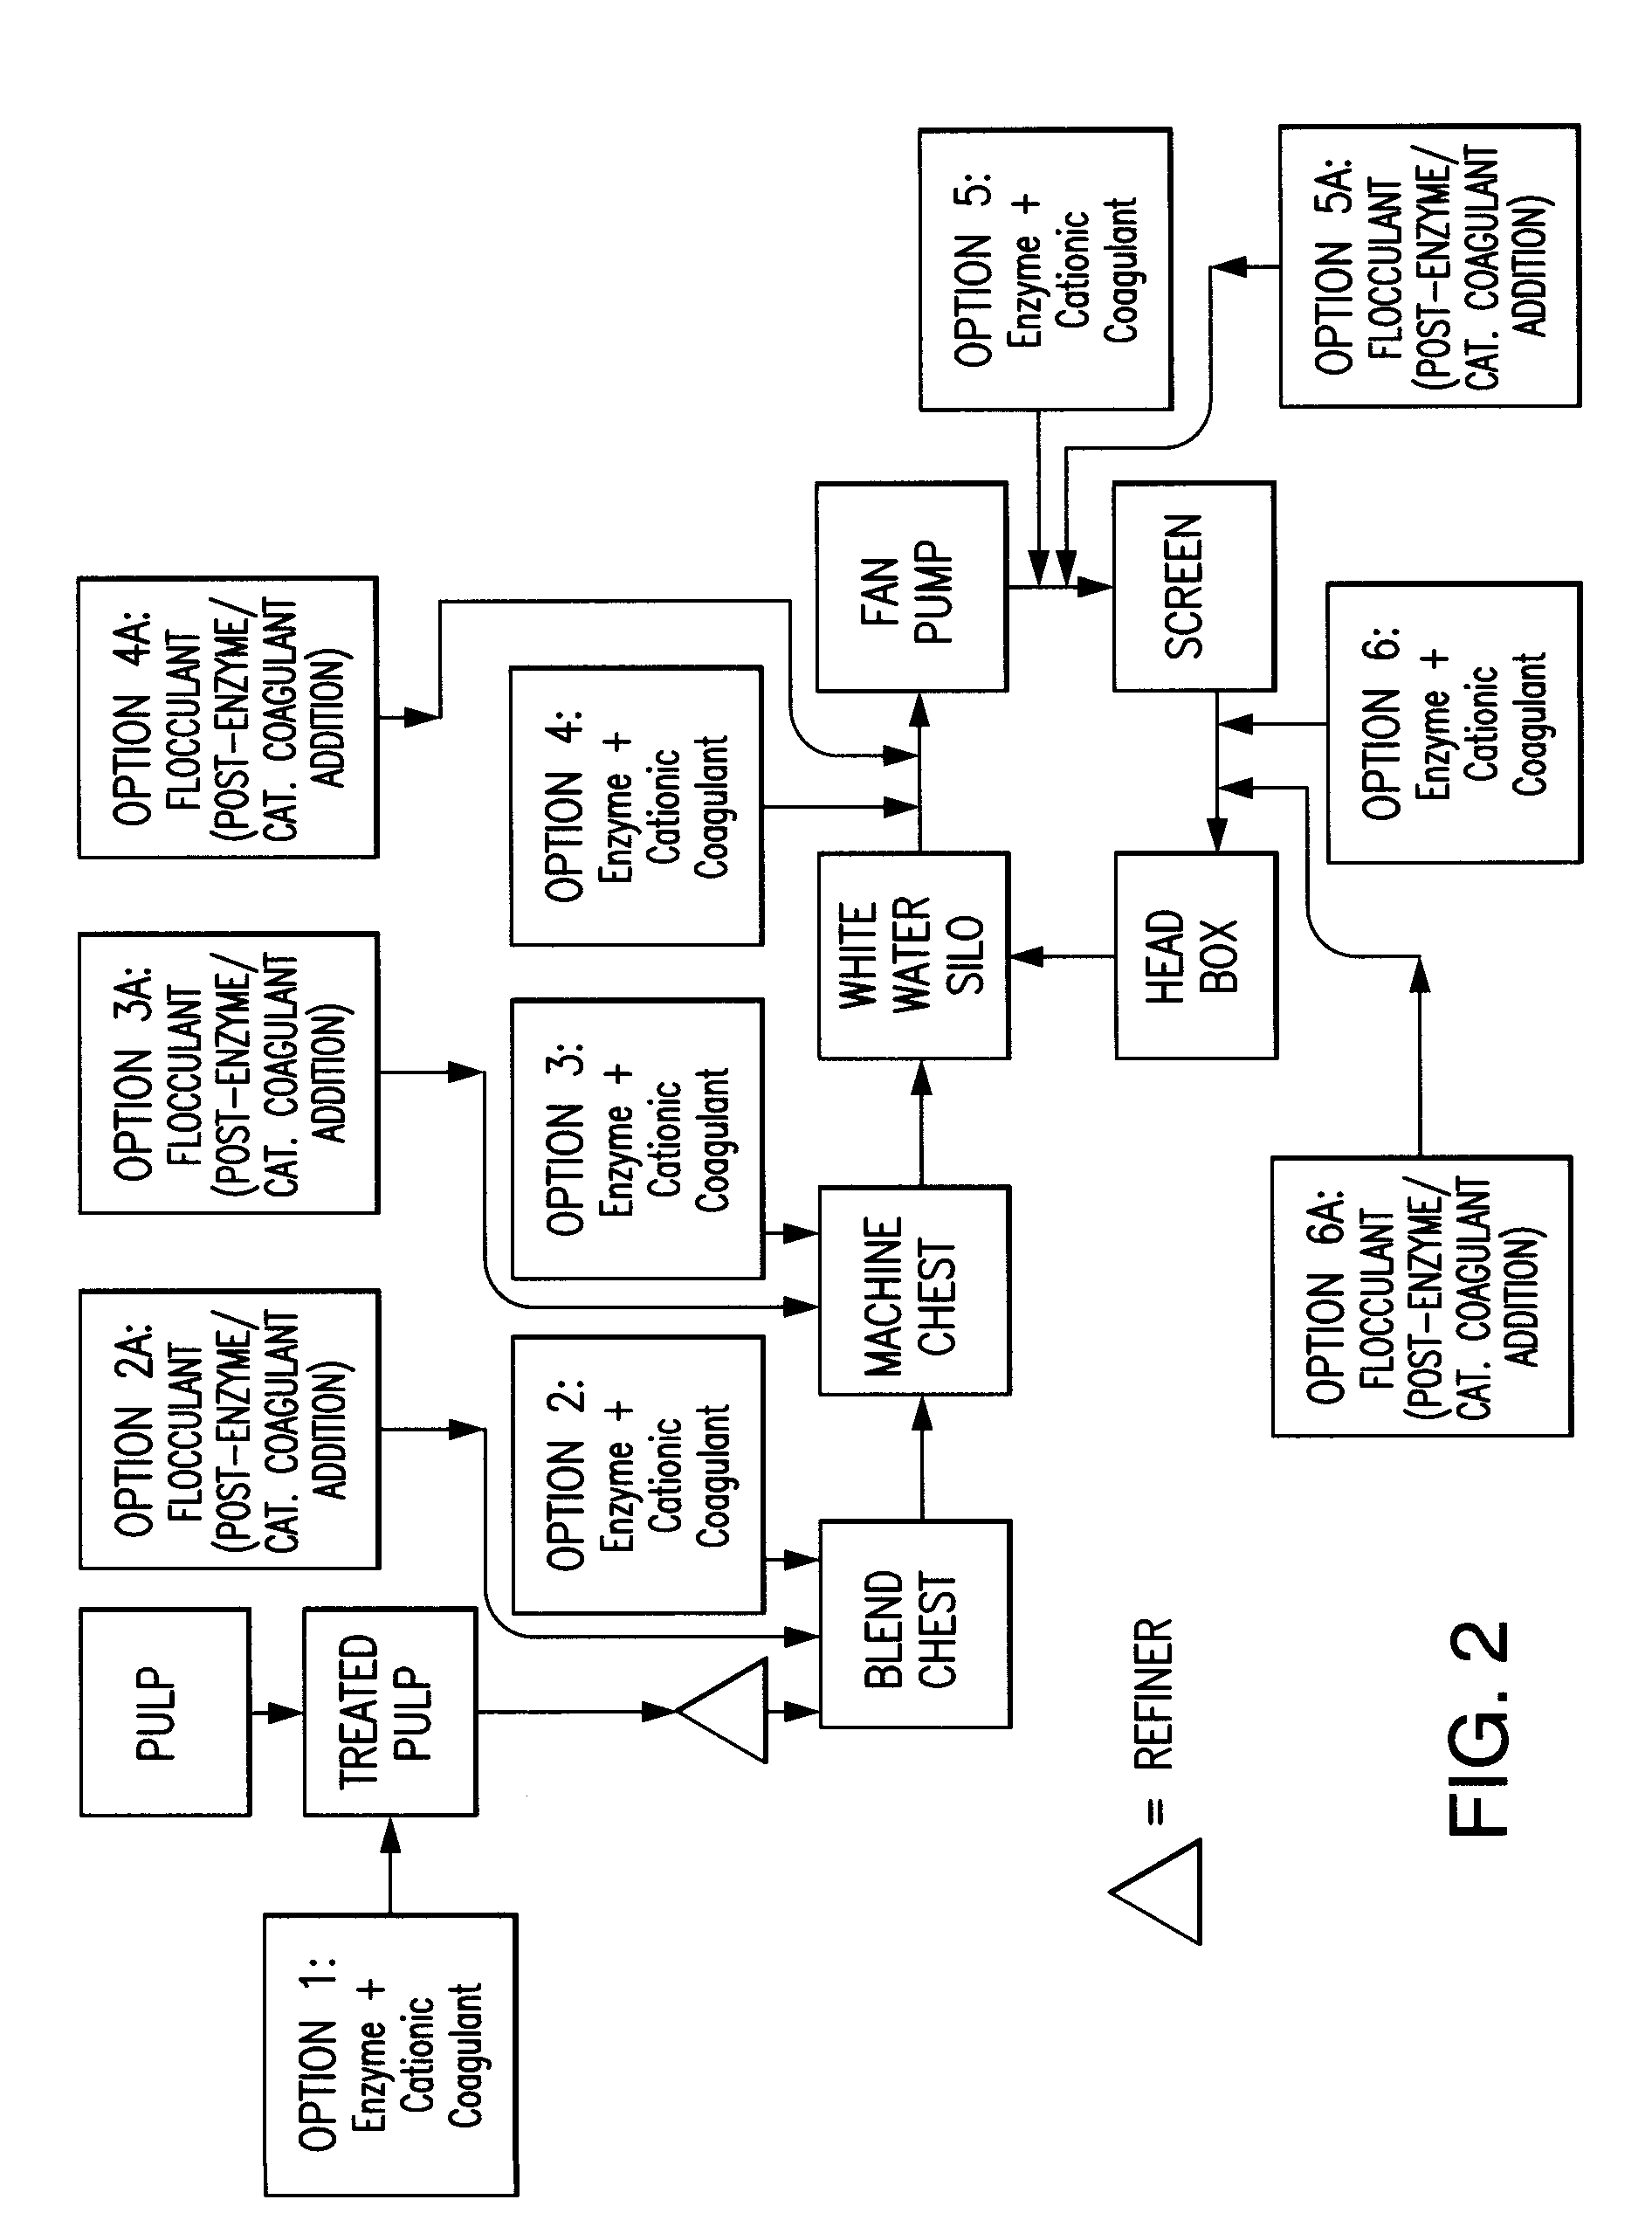 Paper Making Processes and System Using Enzyme and Cationic Coagulant Combination